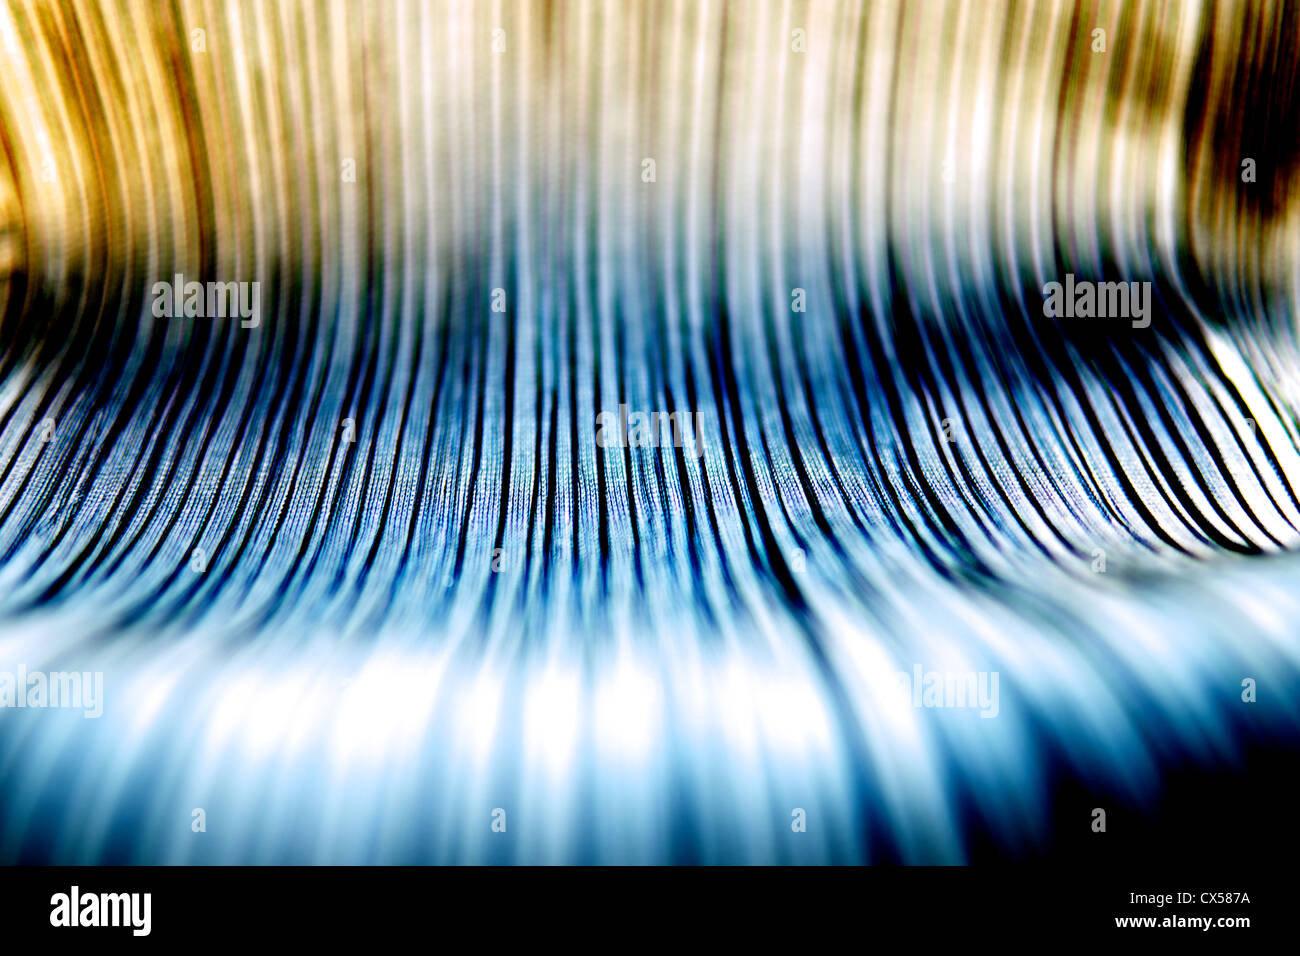 Abstract select focus image of a pleated fabric. Gold and blue hues. Stock Photo